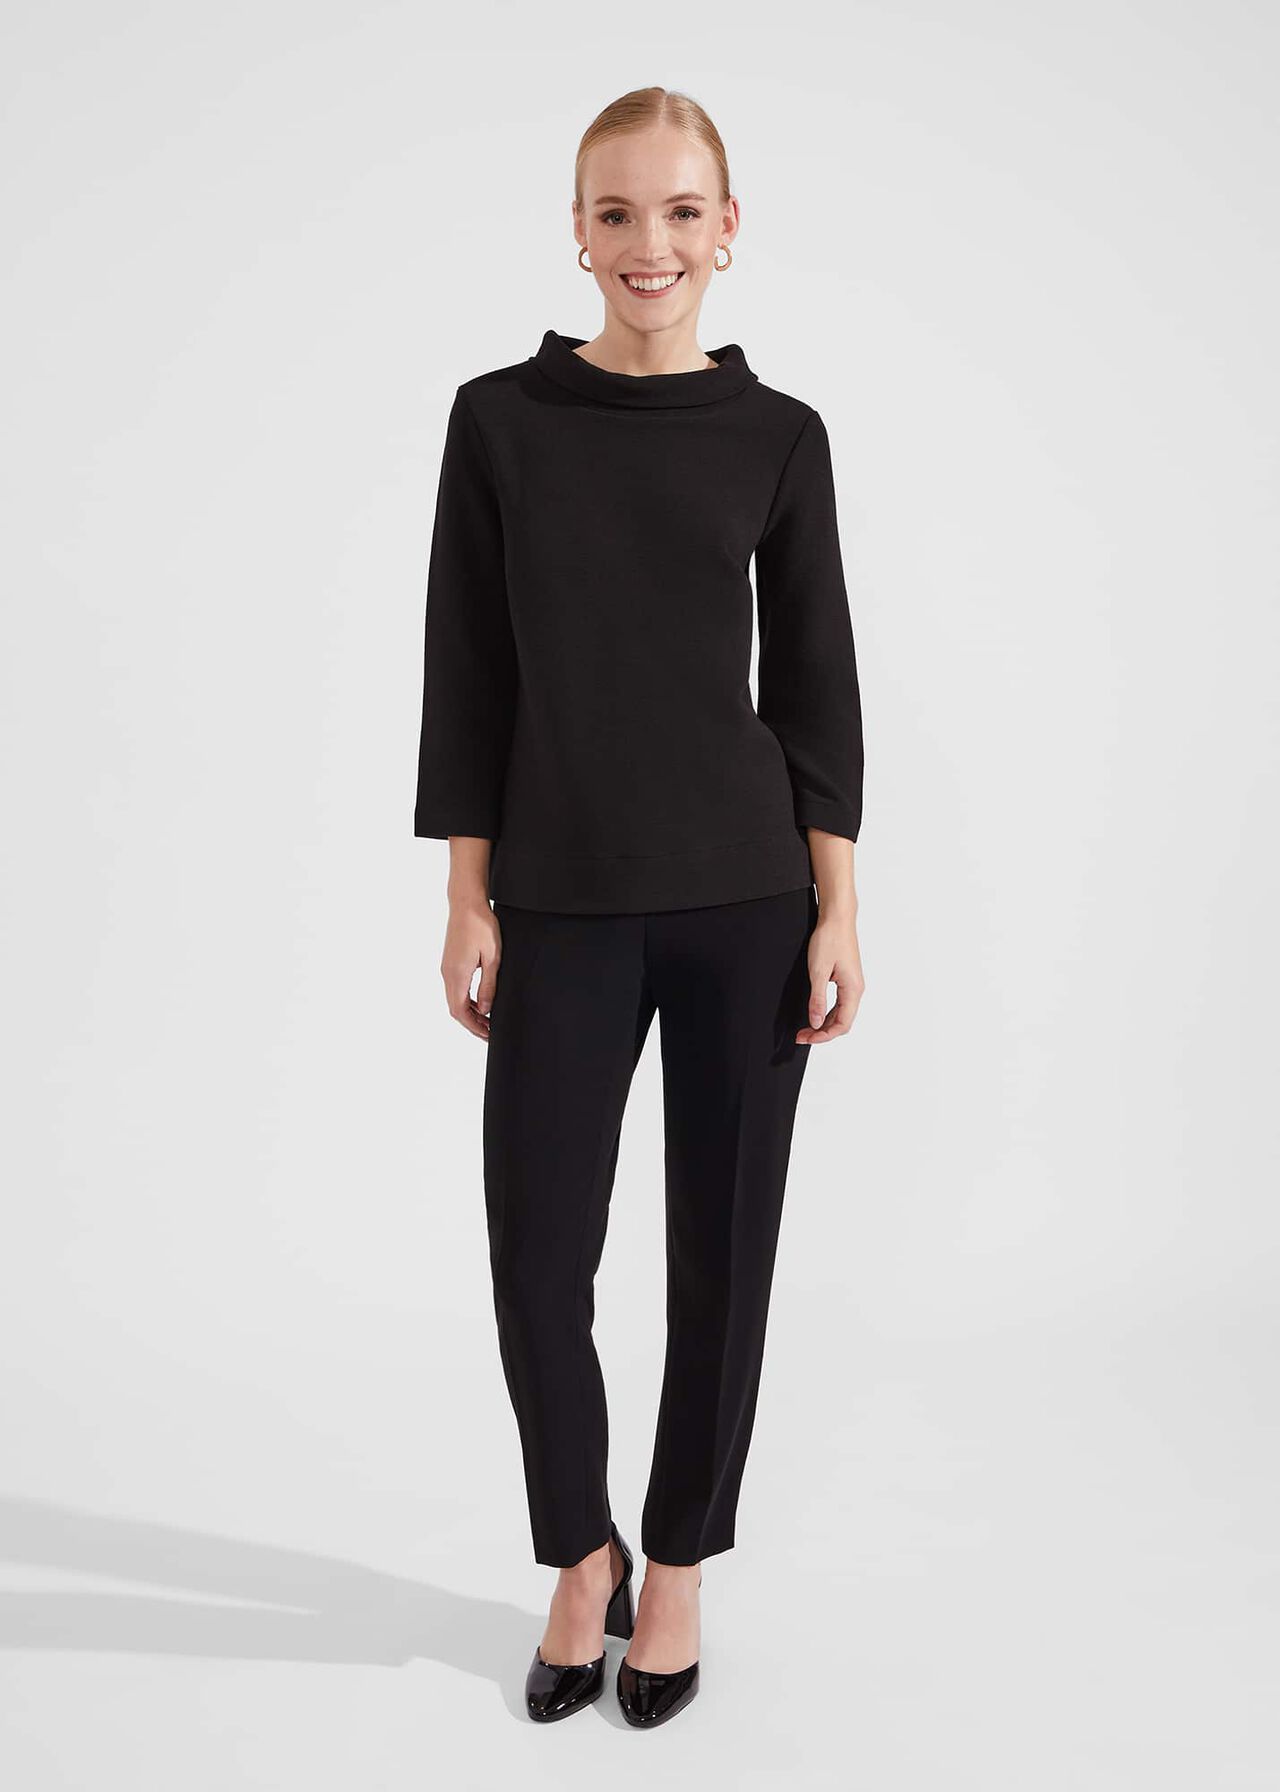 Betsy Textured Top With Cotton , Black, hi-res